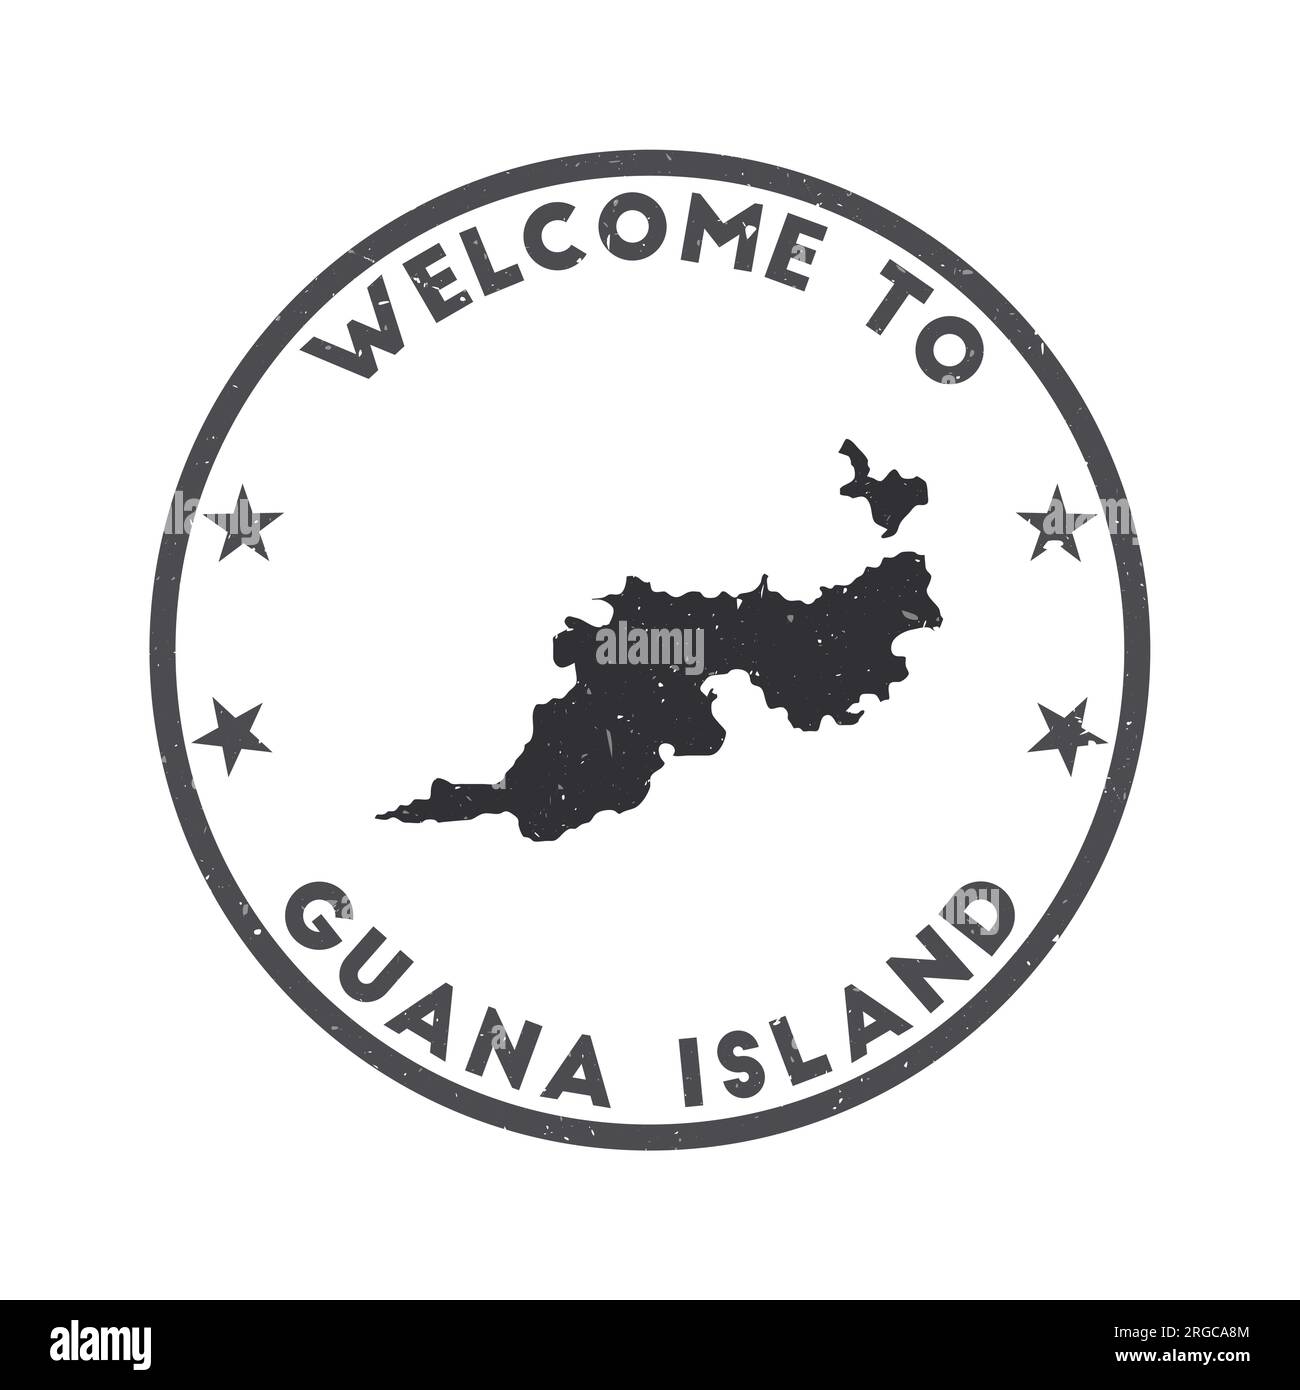 Welcome to Guana Island stamp. Grunge island round stamp with texture in Shady Character color theme. Vintage style geometric Guana Island seal. Artis Stock Vector